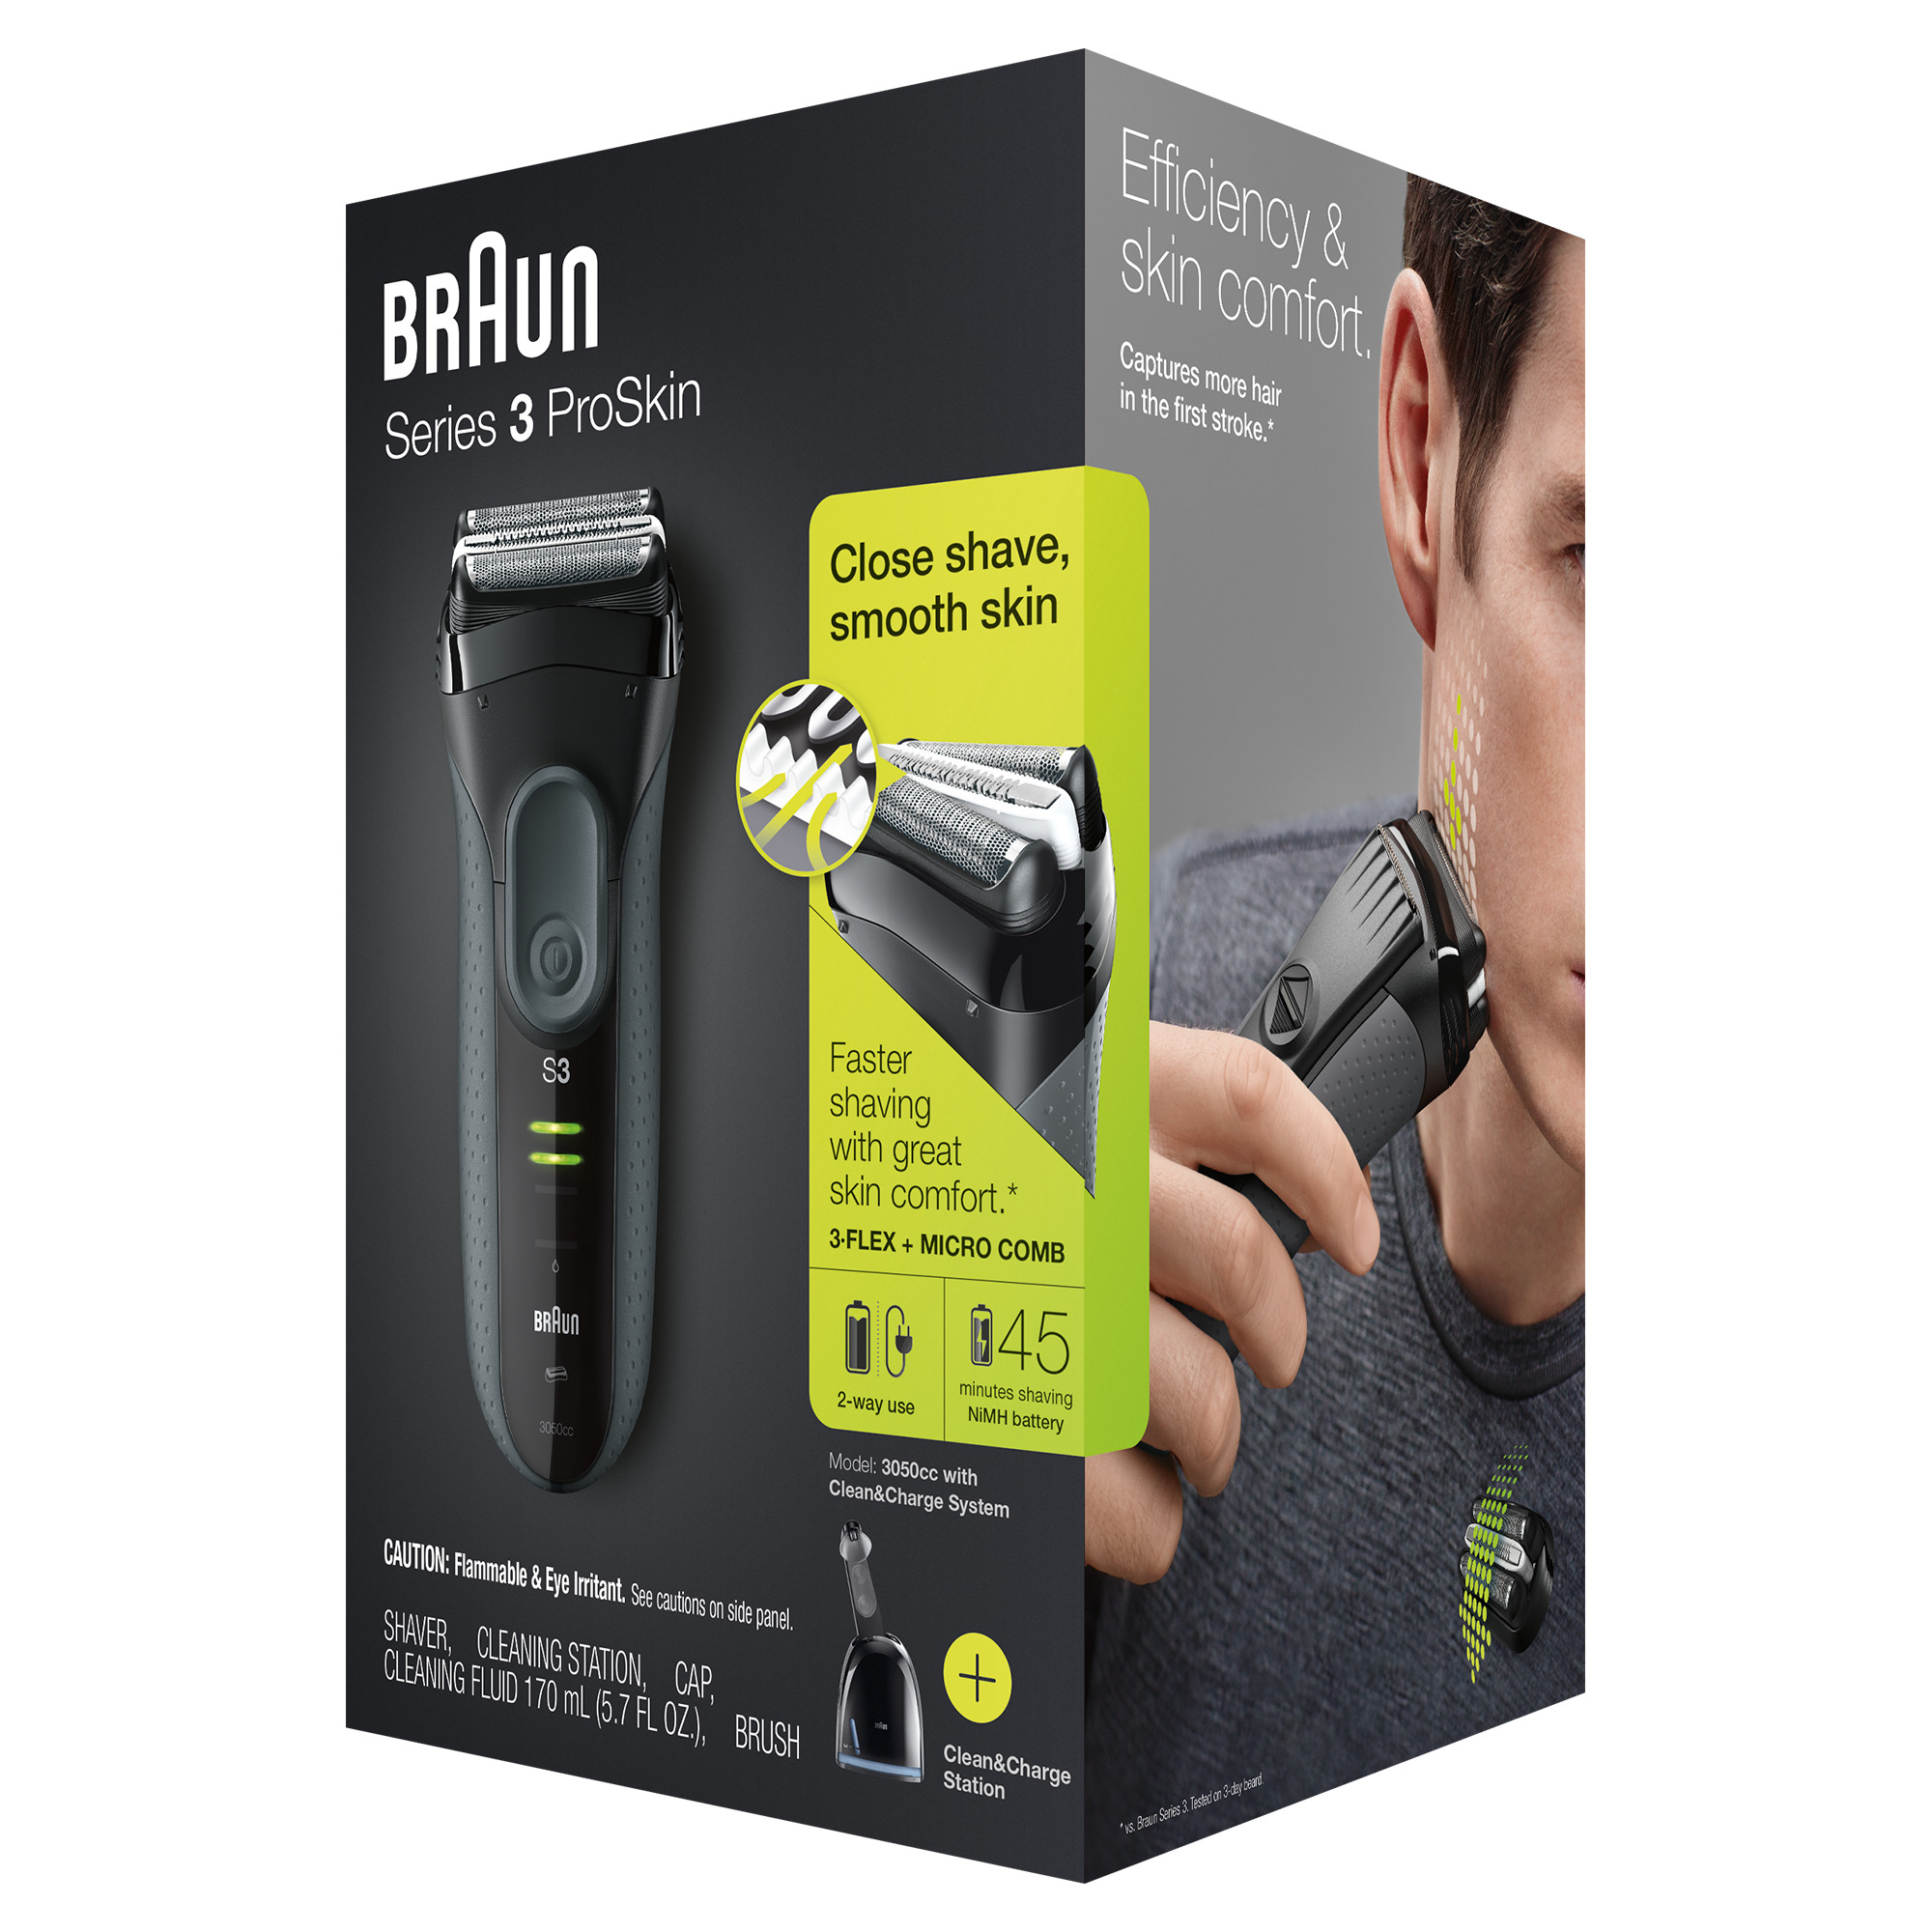 Braun Series 3 ProSkin 3050cc Wet Dry Electric Shaver, Clean Station - image 2 of 6